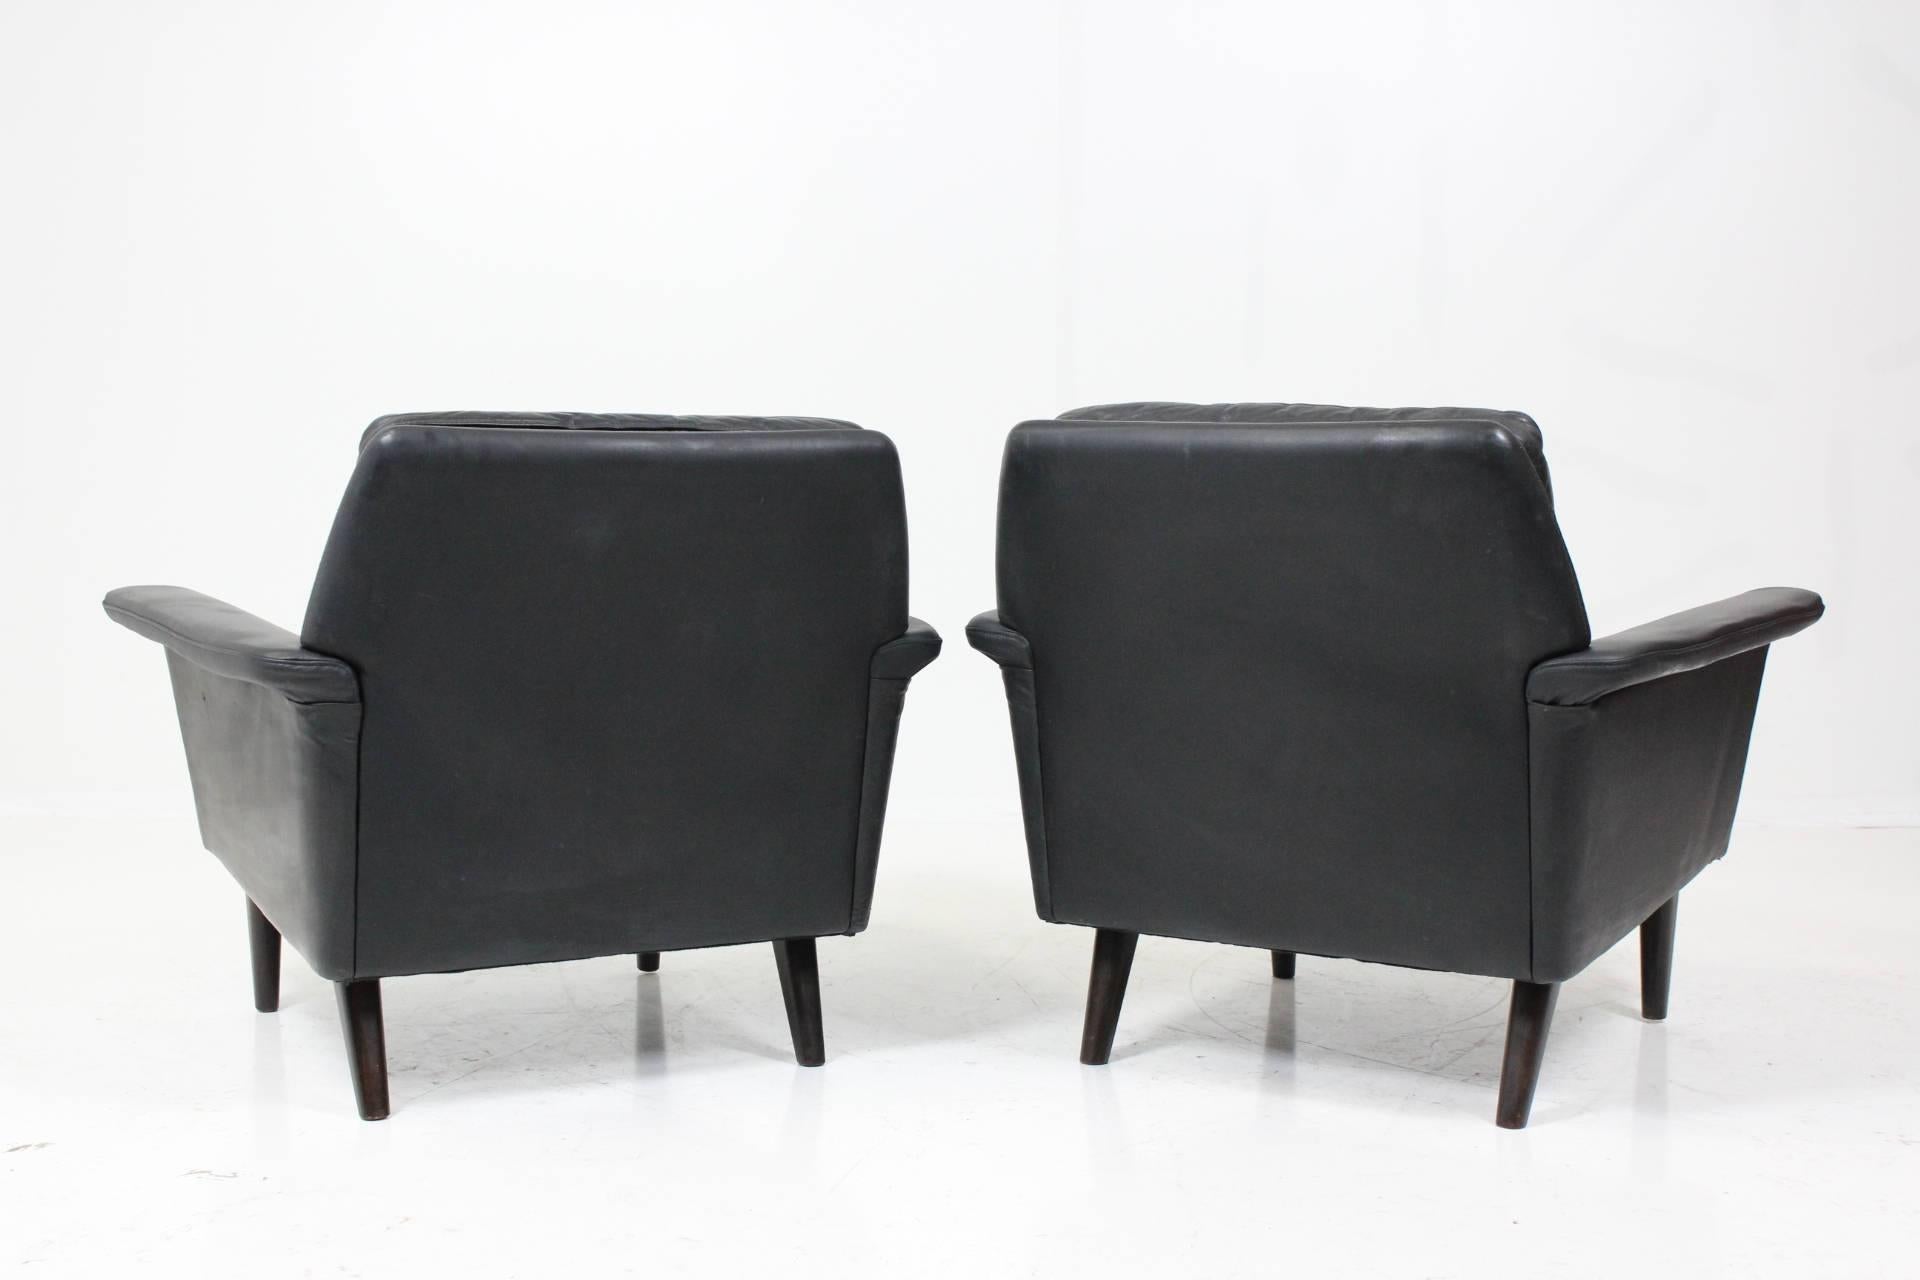 Pair of Classic Mid-Century design lounge chairs in black leather by Hans Olsen. Partly restored, new armrests leather upholstery, minor signs of wear, overall good condition.